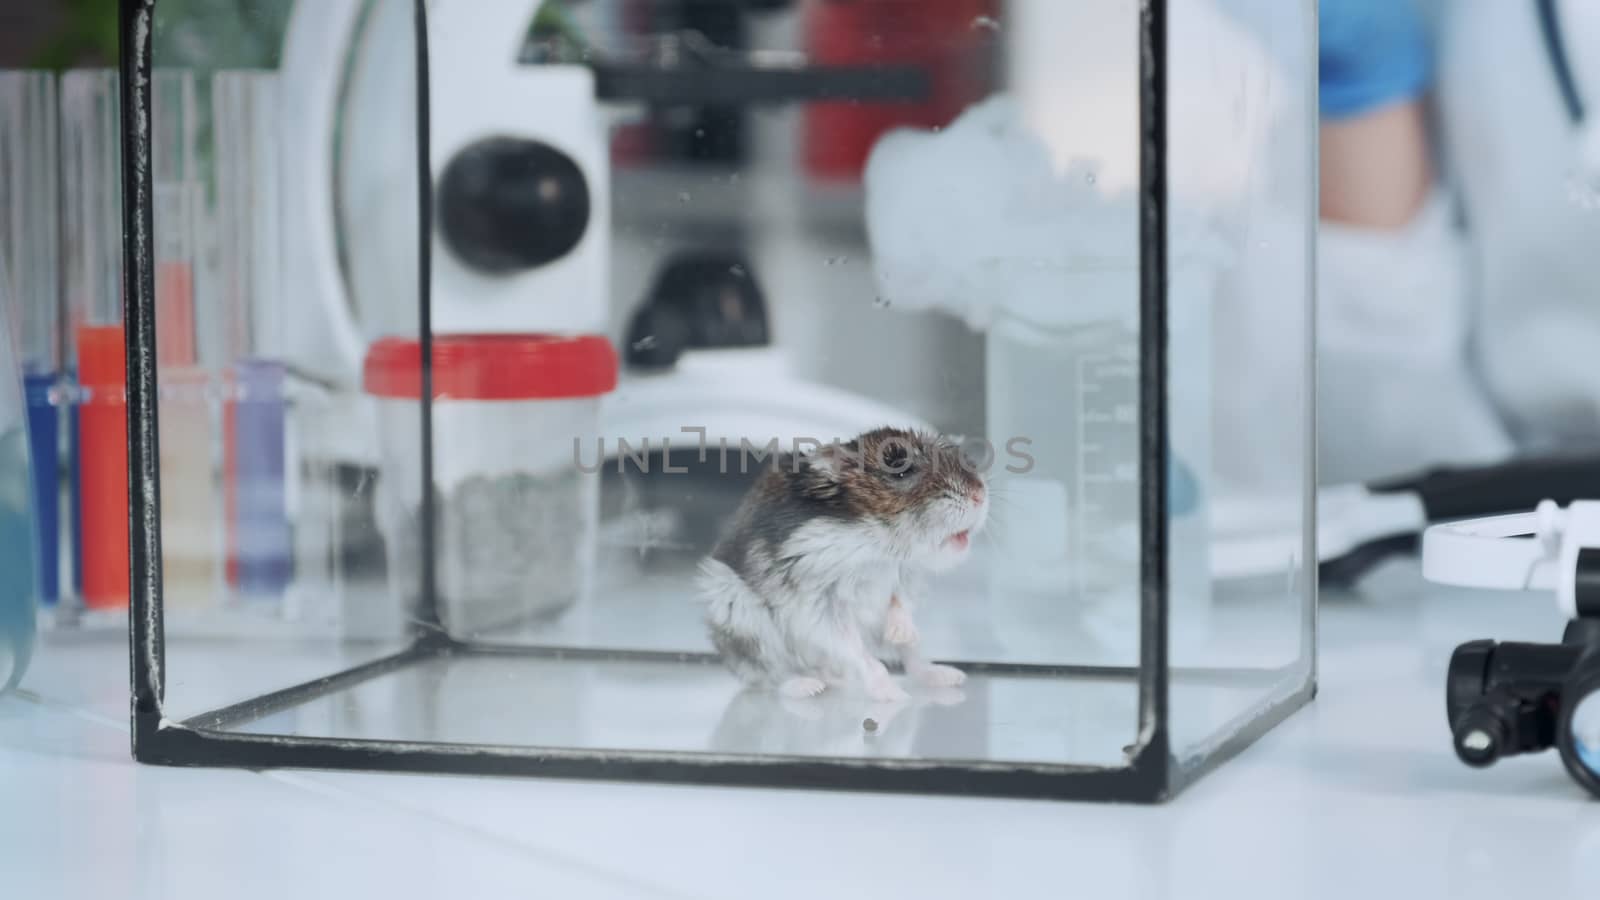 Lab hamster in glass container on working table in chemistry laboratory by art24pro